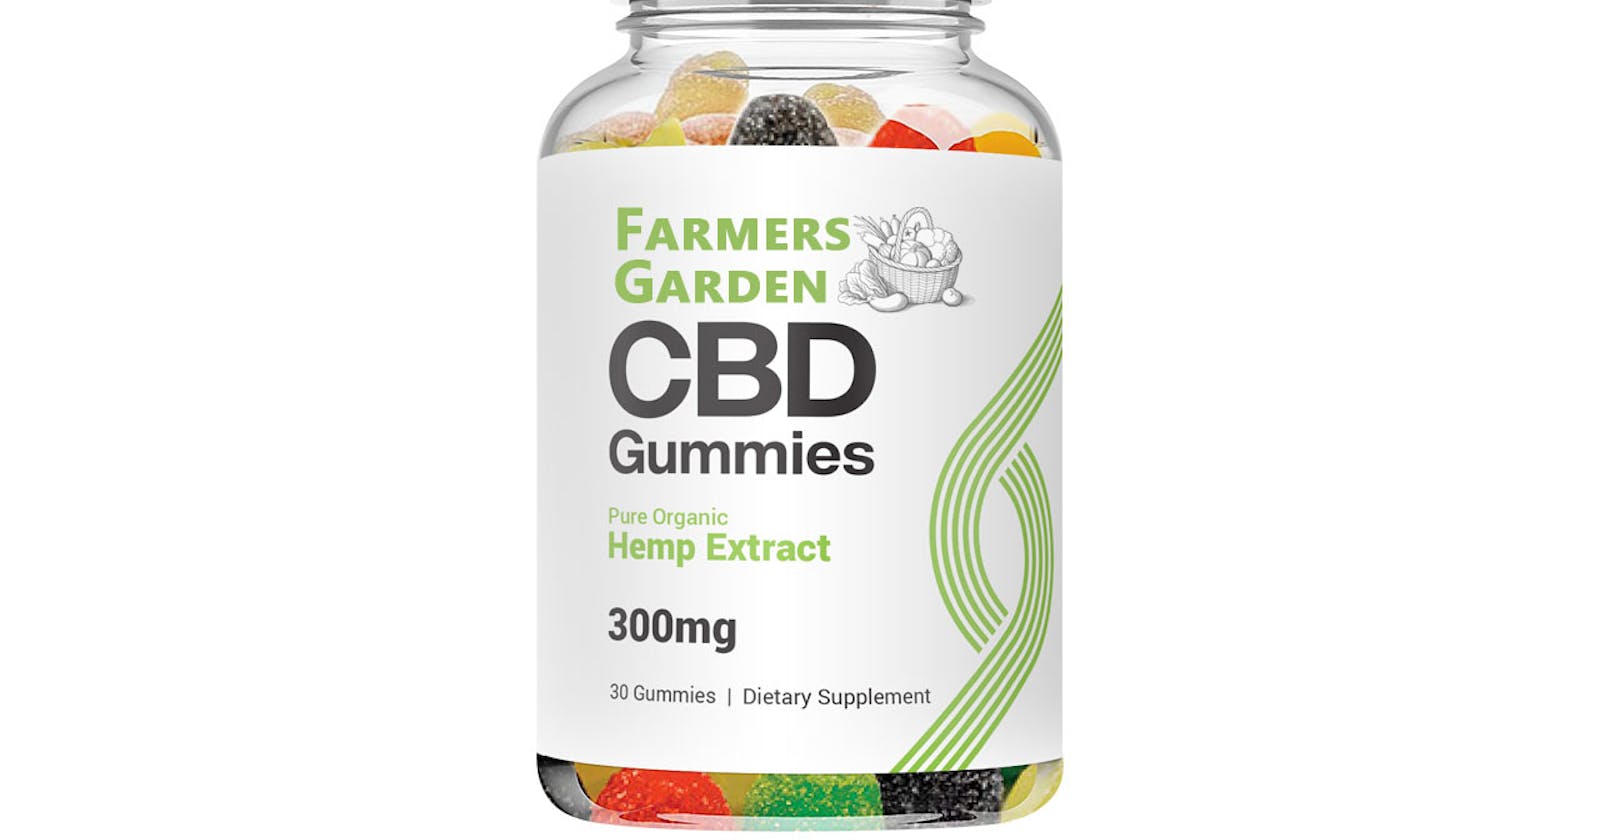 Farmers Garden CBD Gummies- Help Pain Relief, Safe Health And No Side Effects, Reviews Price & Buy!